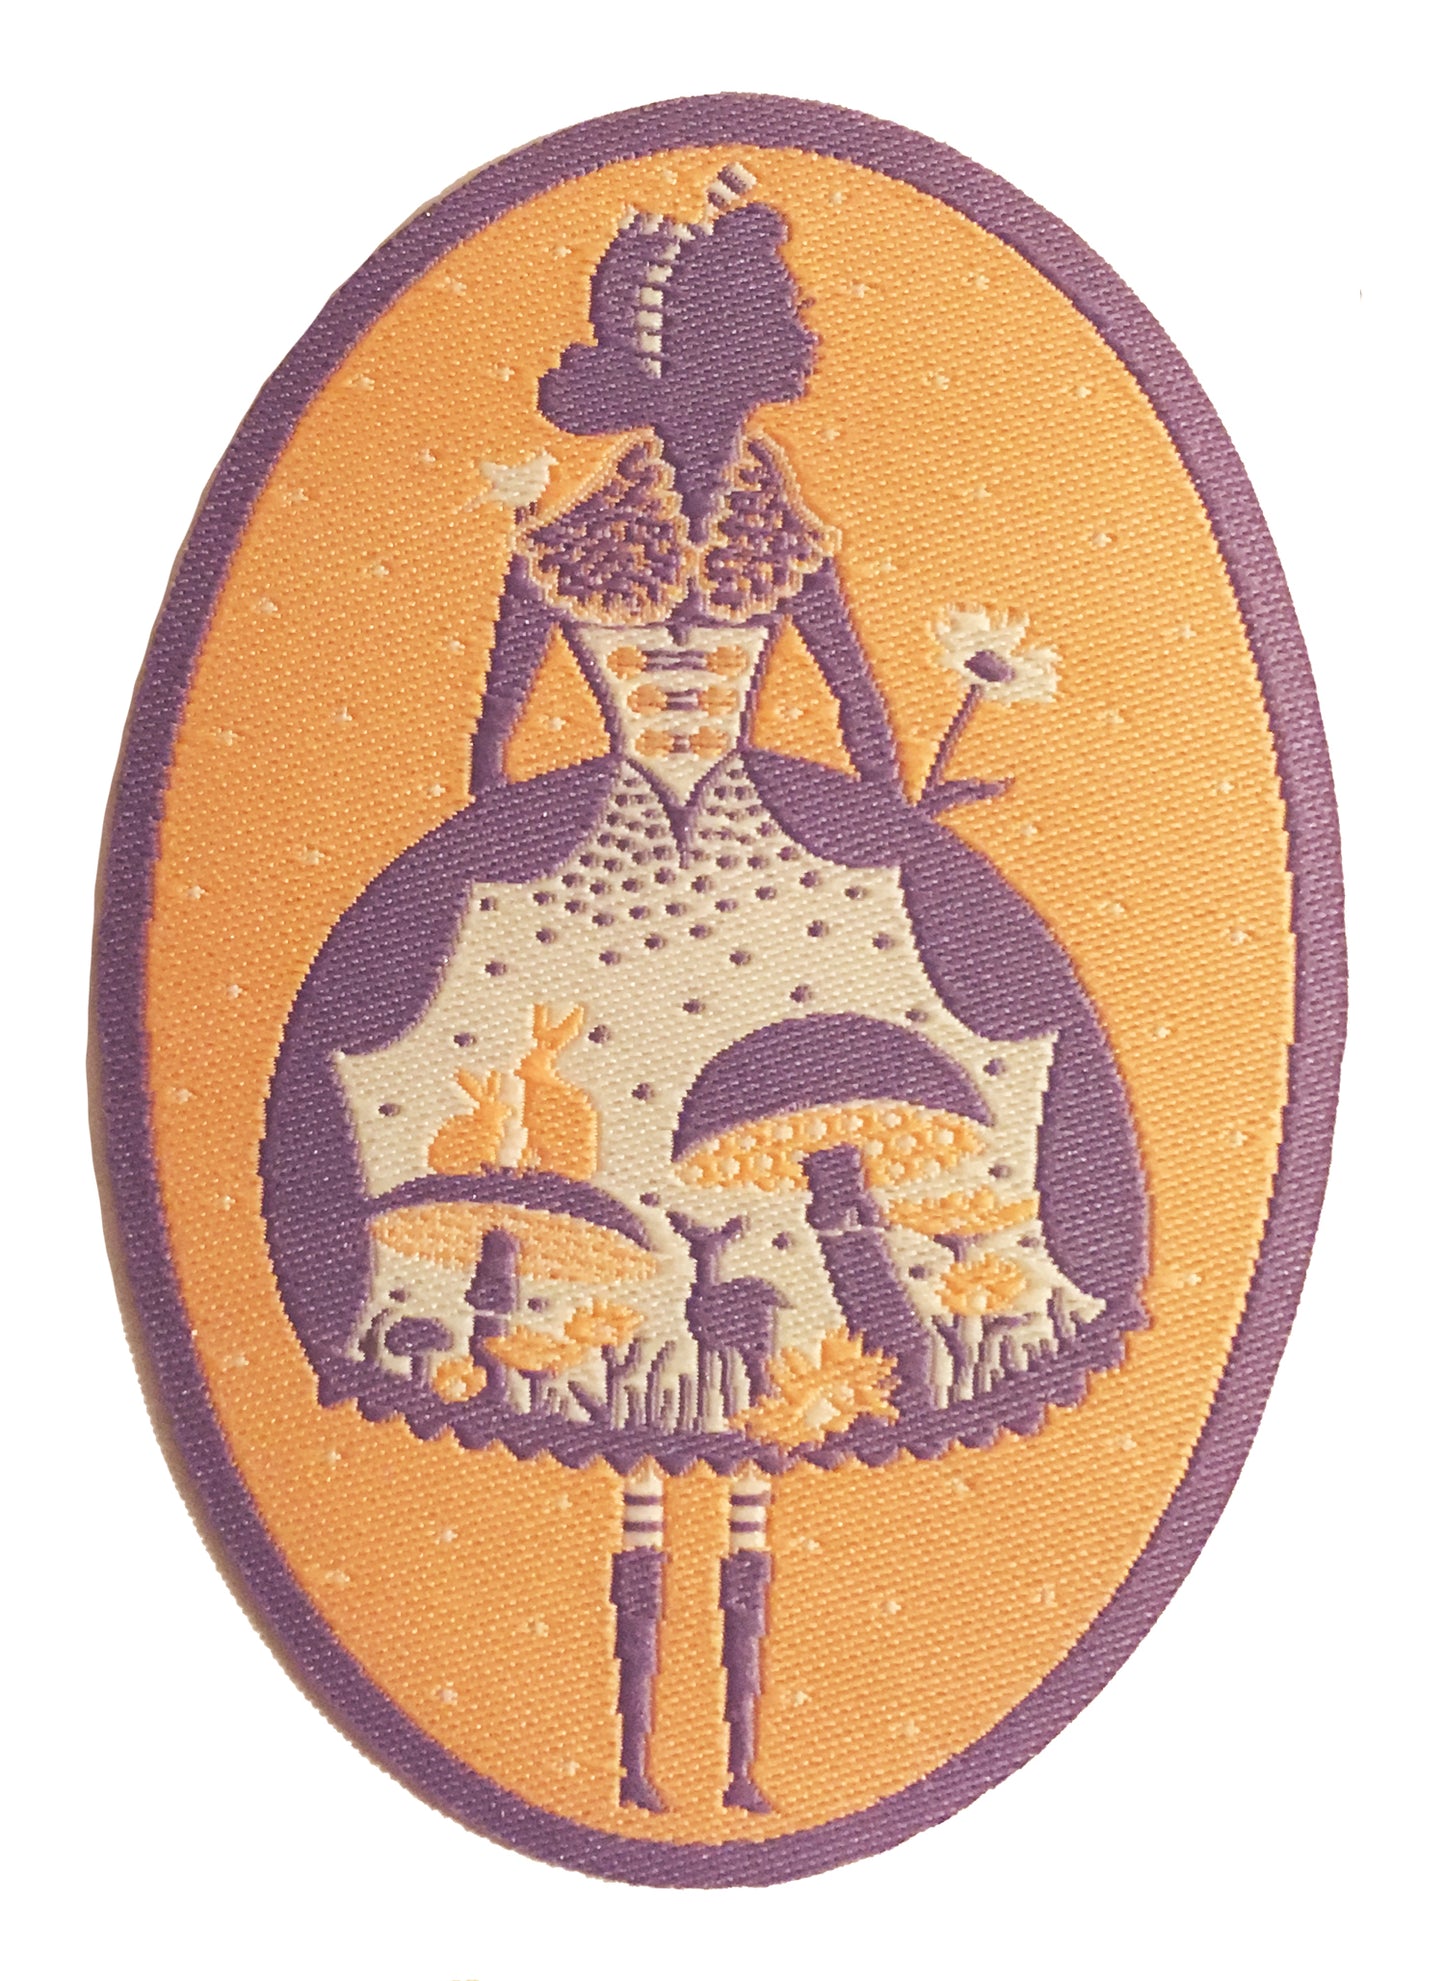 Yellow, grey and white Alice patch with deer, mushrooms and bunnies